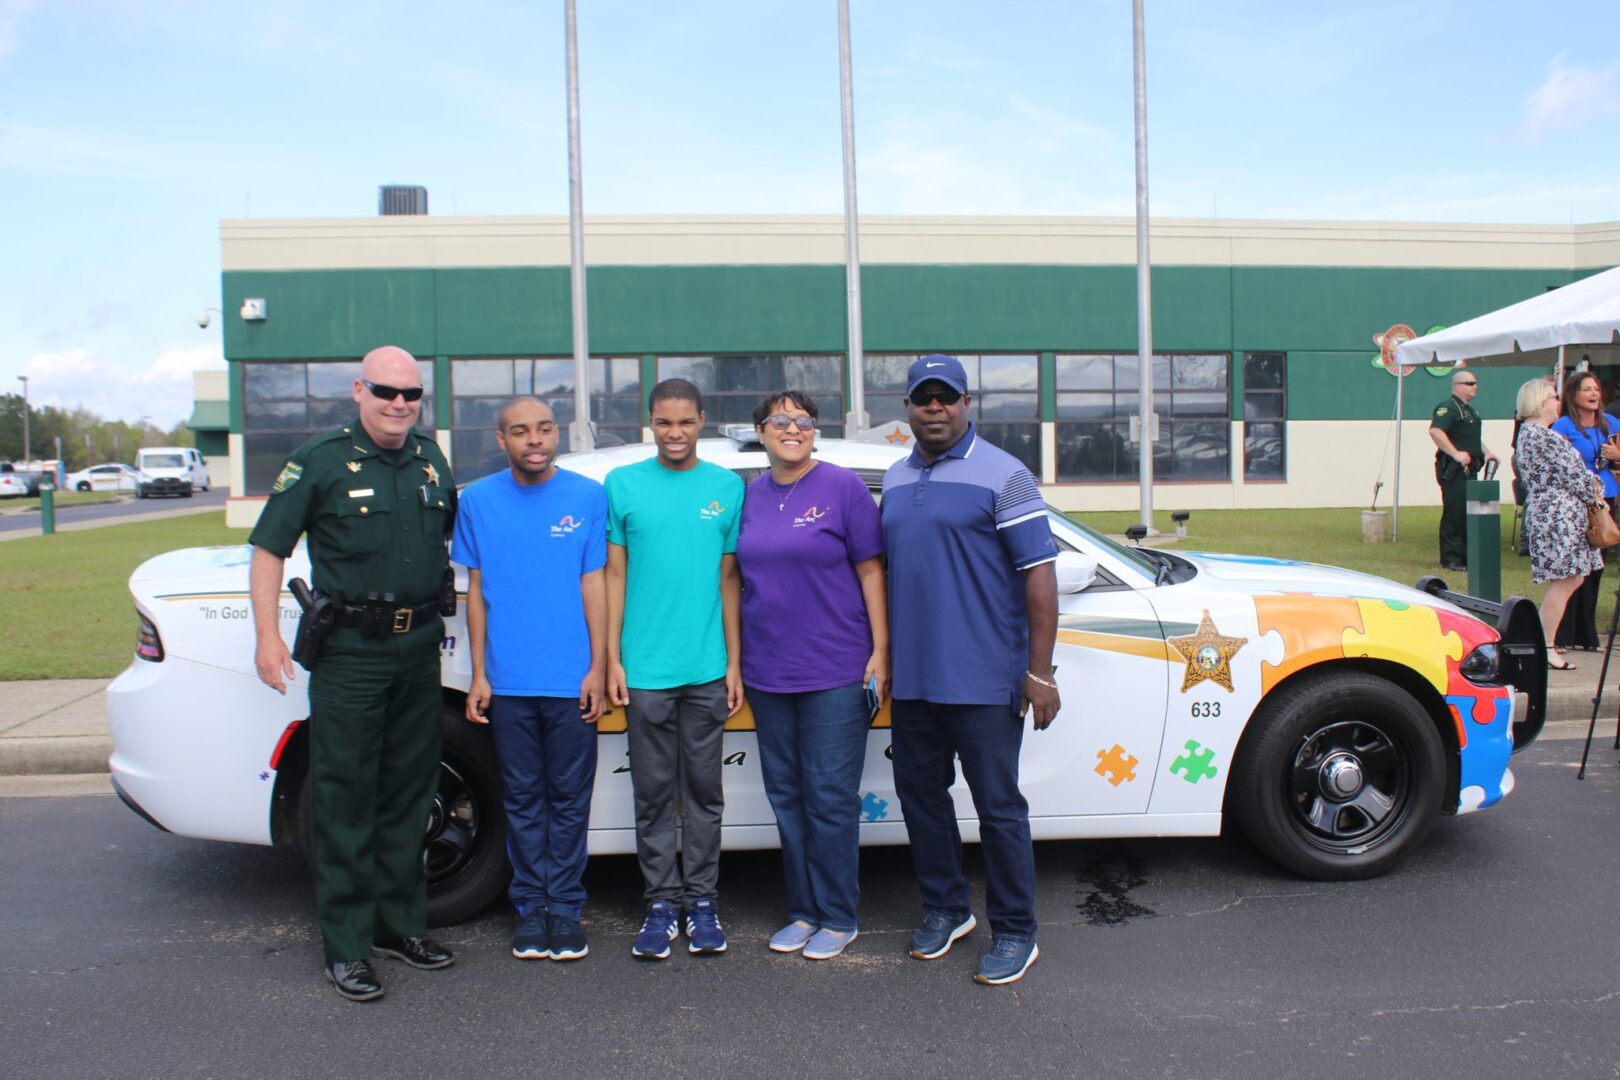 Two police officers and four civilians standing beside a police car at a community event.